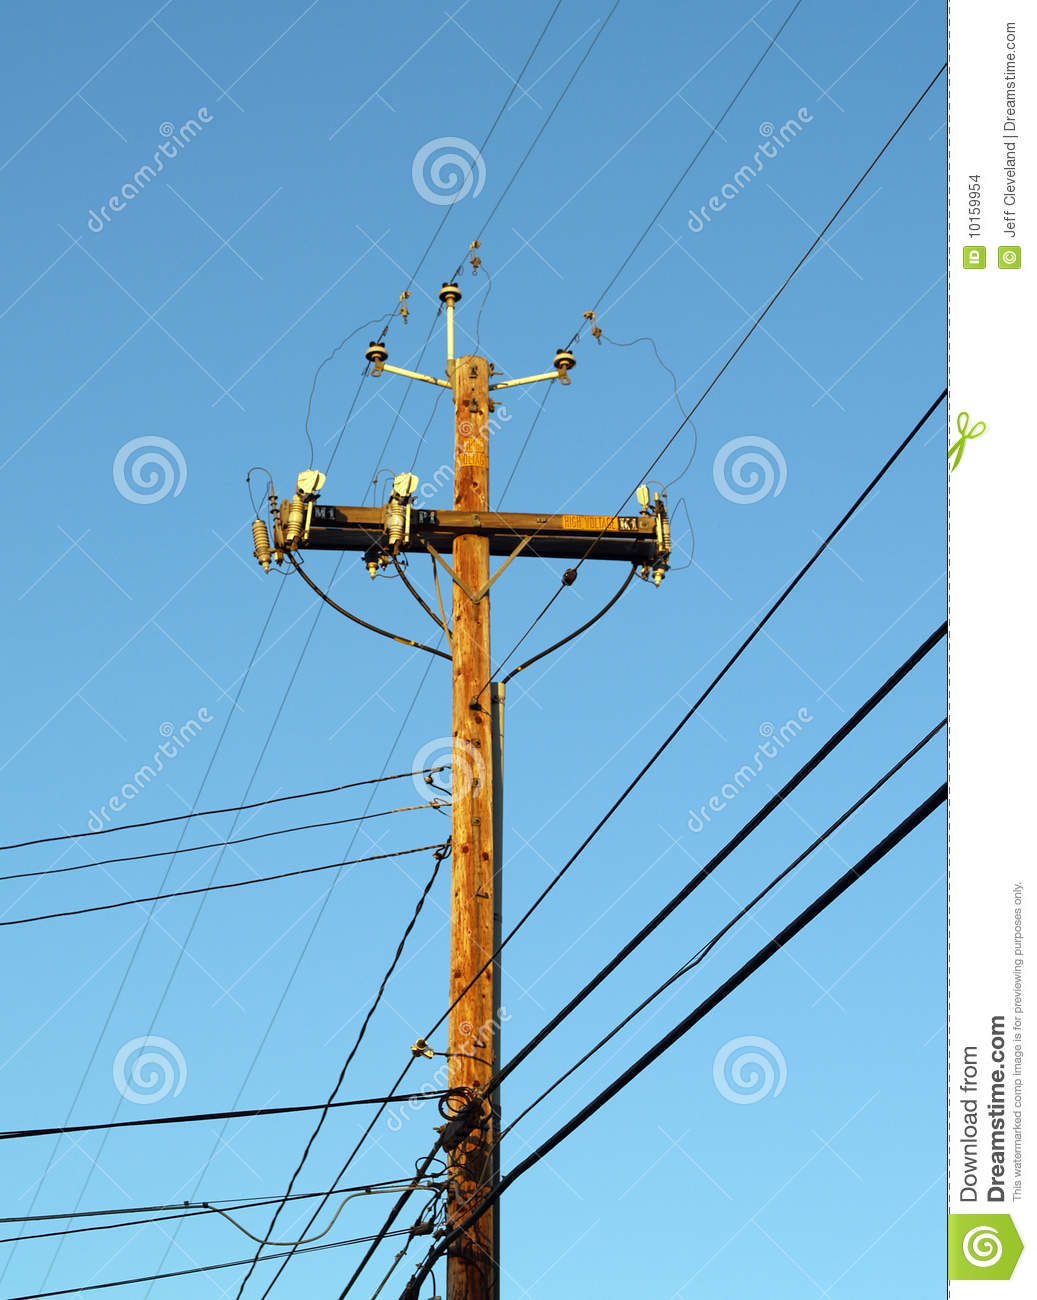 Wooden Telephone Pole Power Pole Against Blue Sky Stock Images   Image